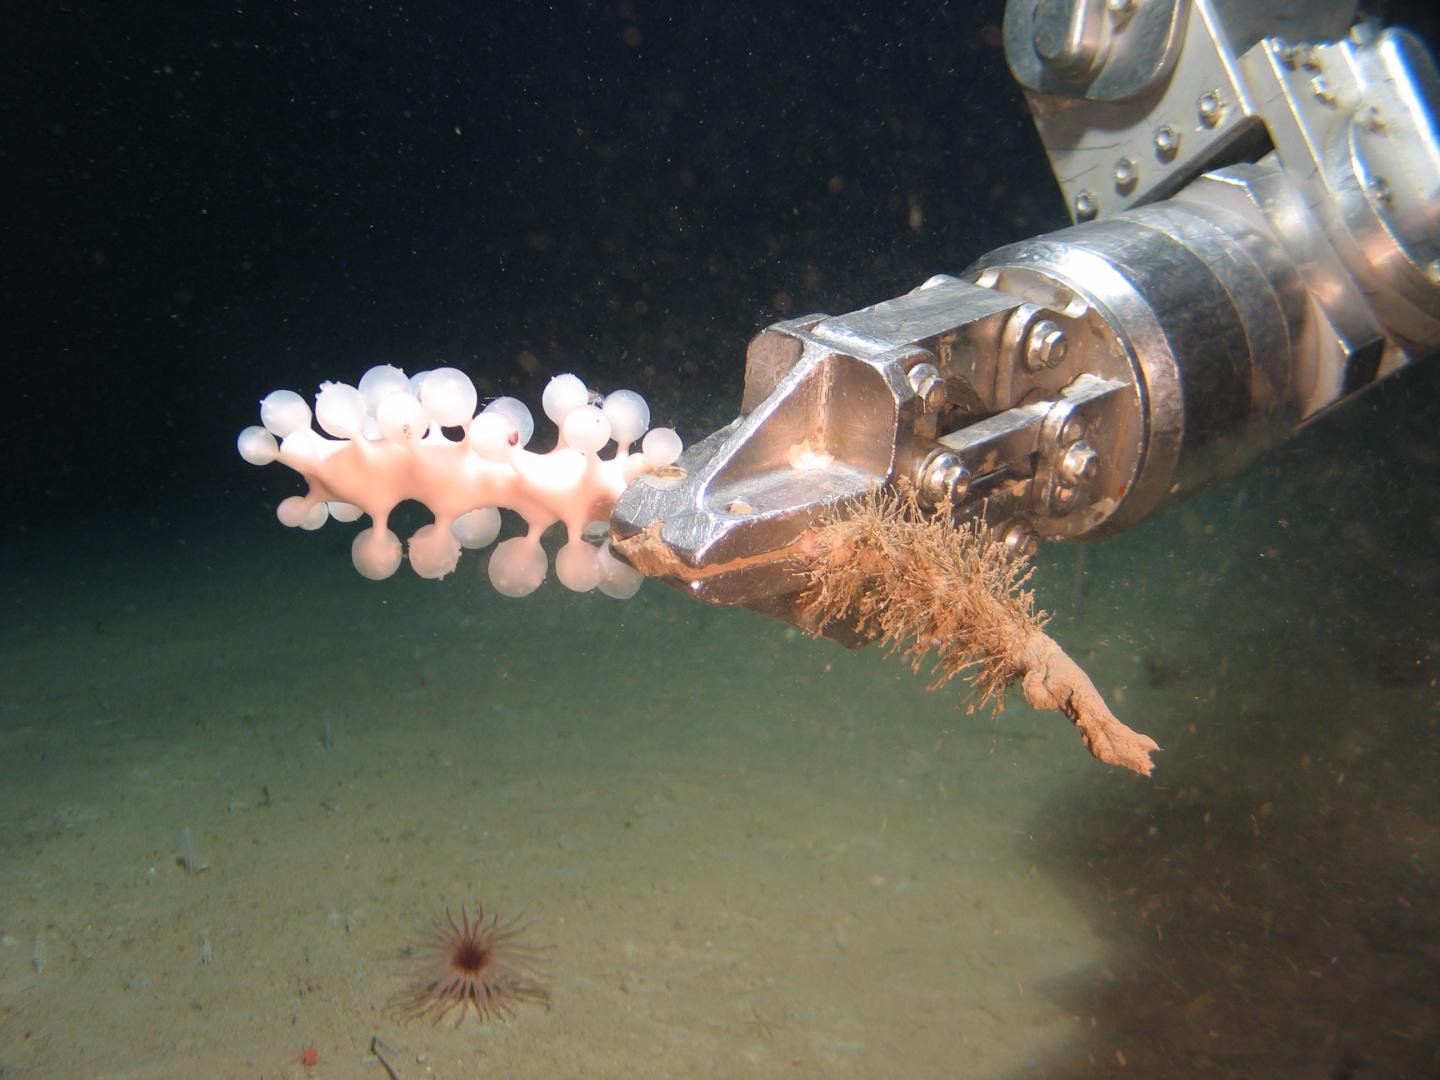 An ROV fitted with an arm for collecting marine samples